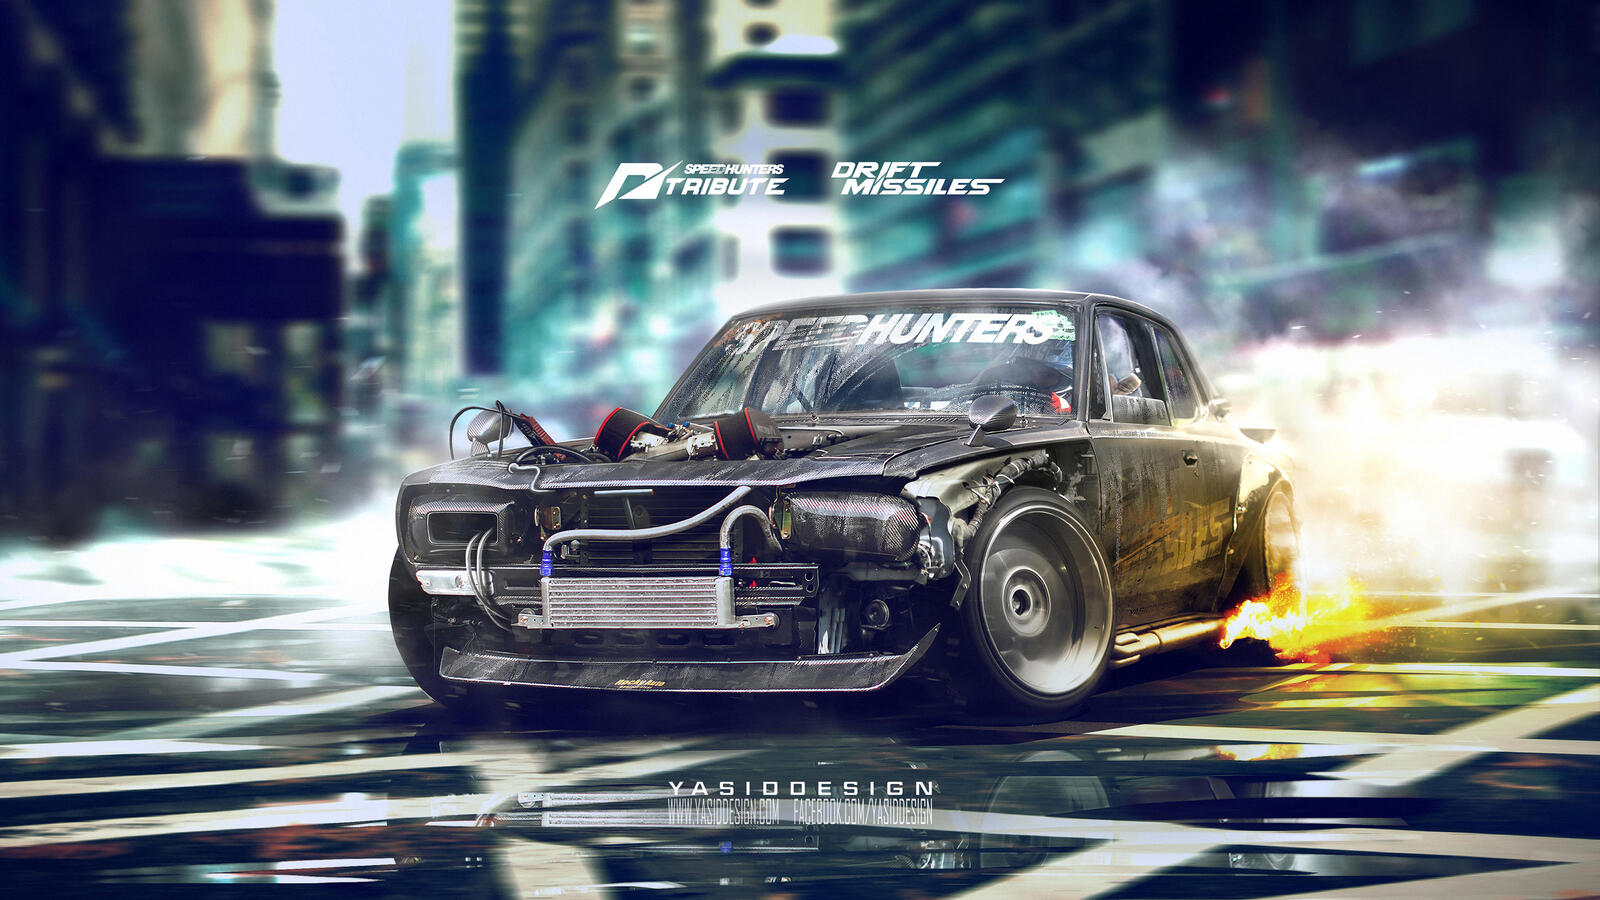 Free photo Screensaver with nissan skyline in drifting